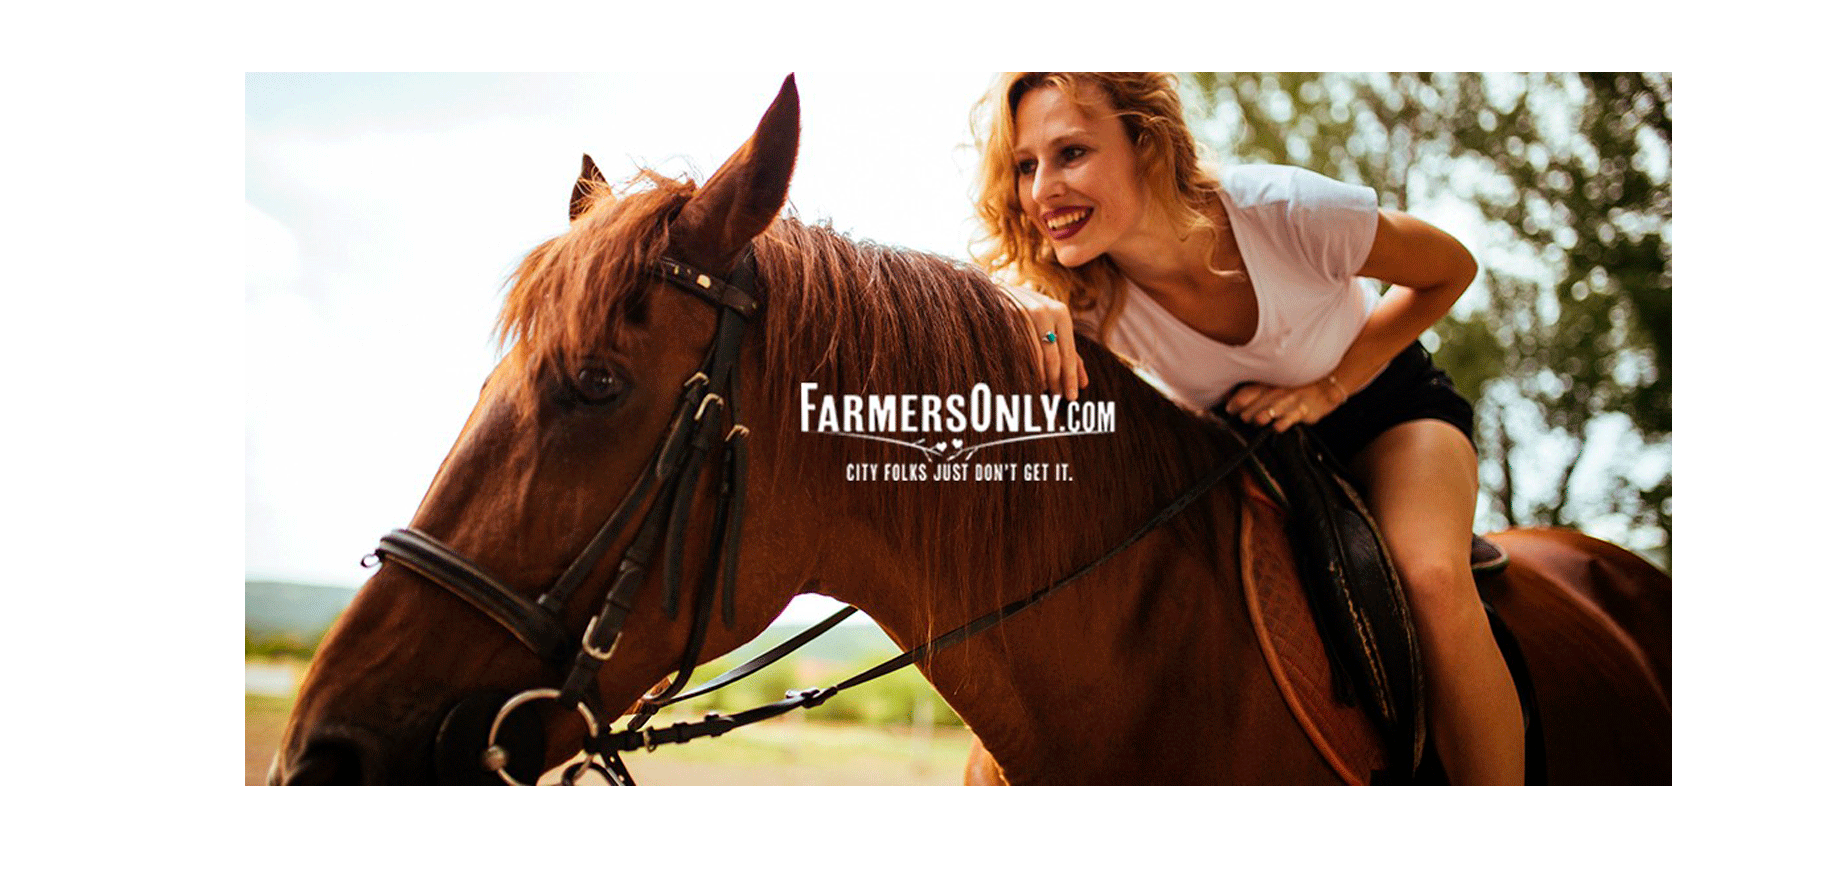 Farmers only dating login